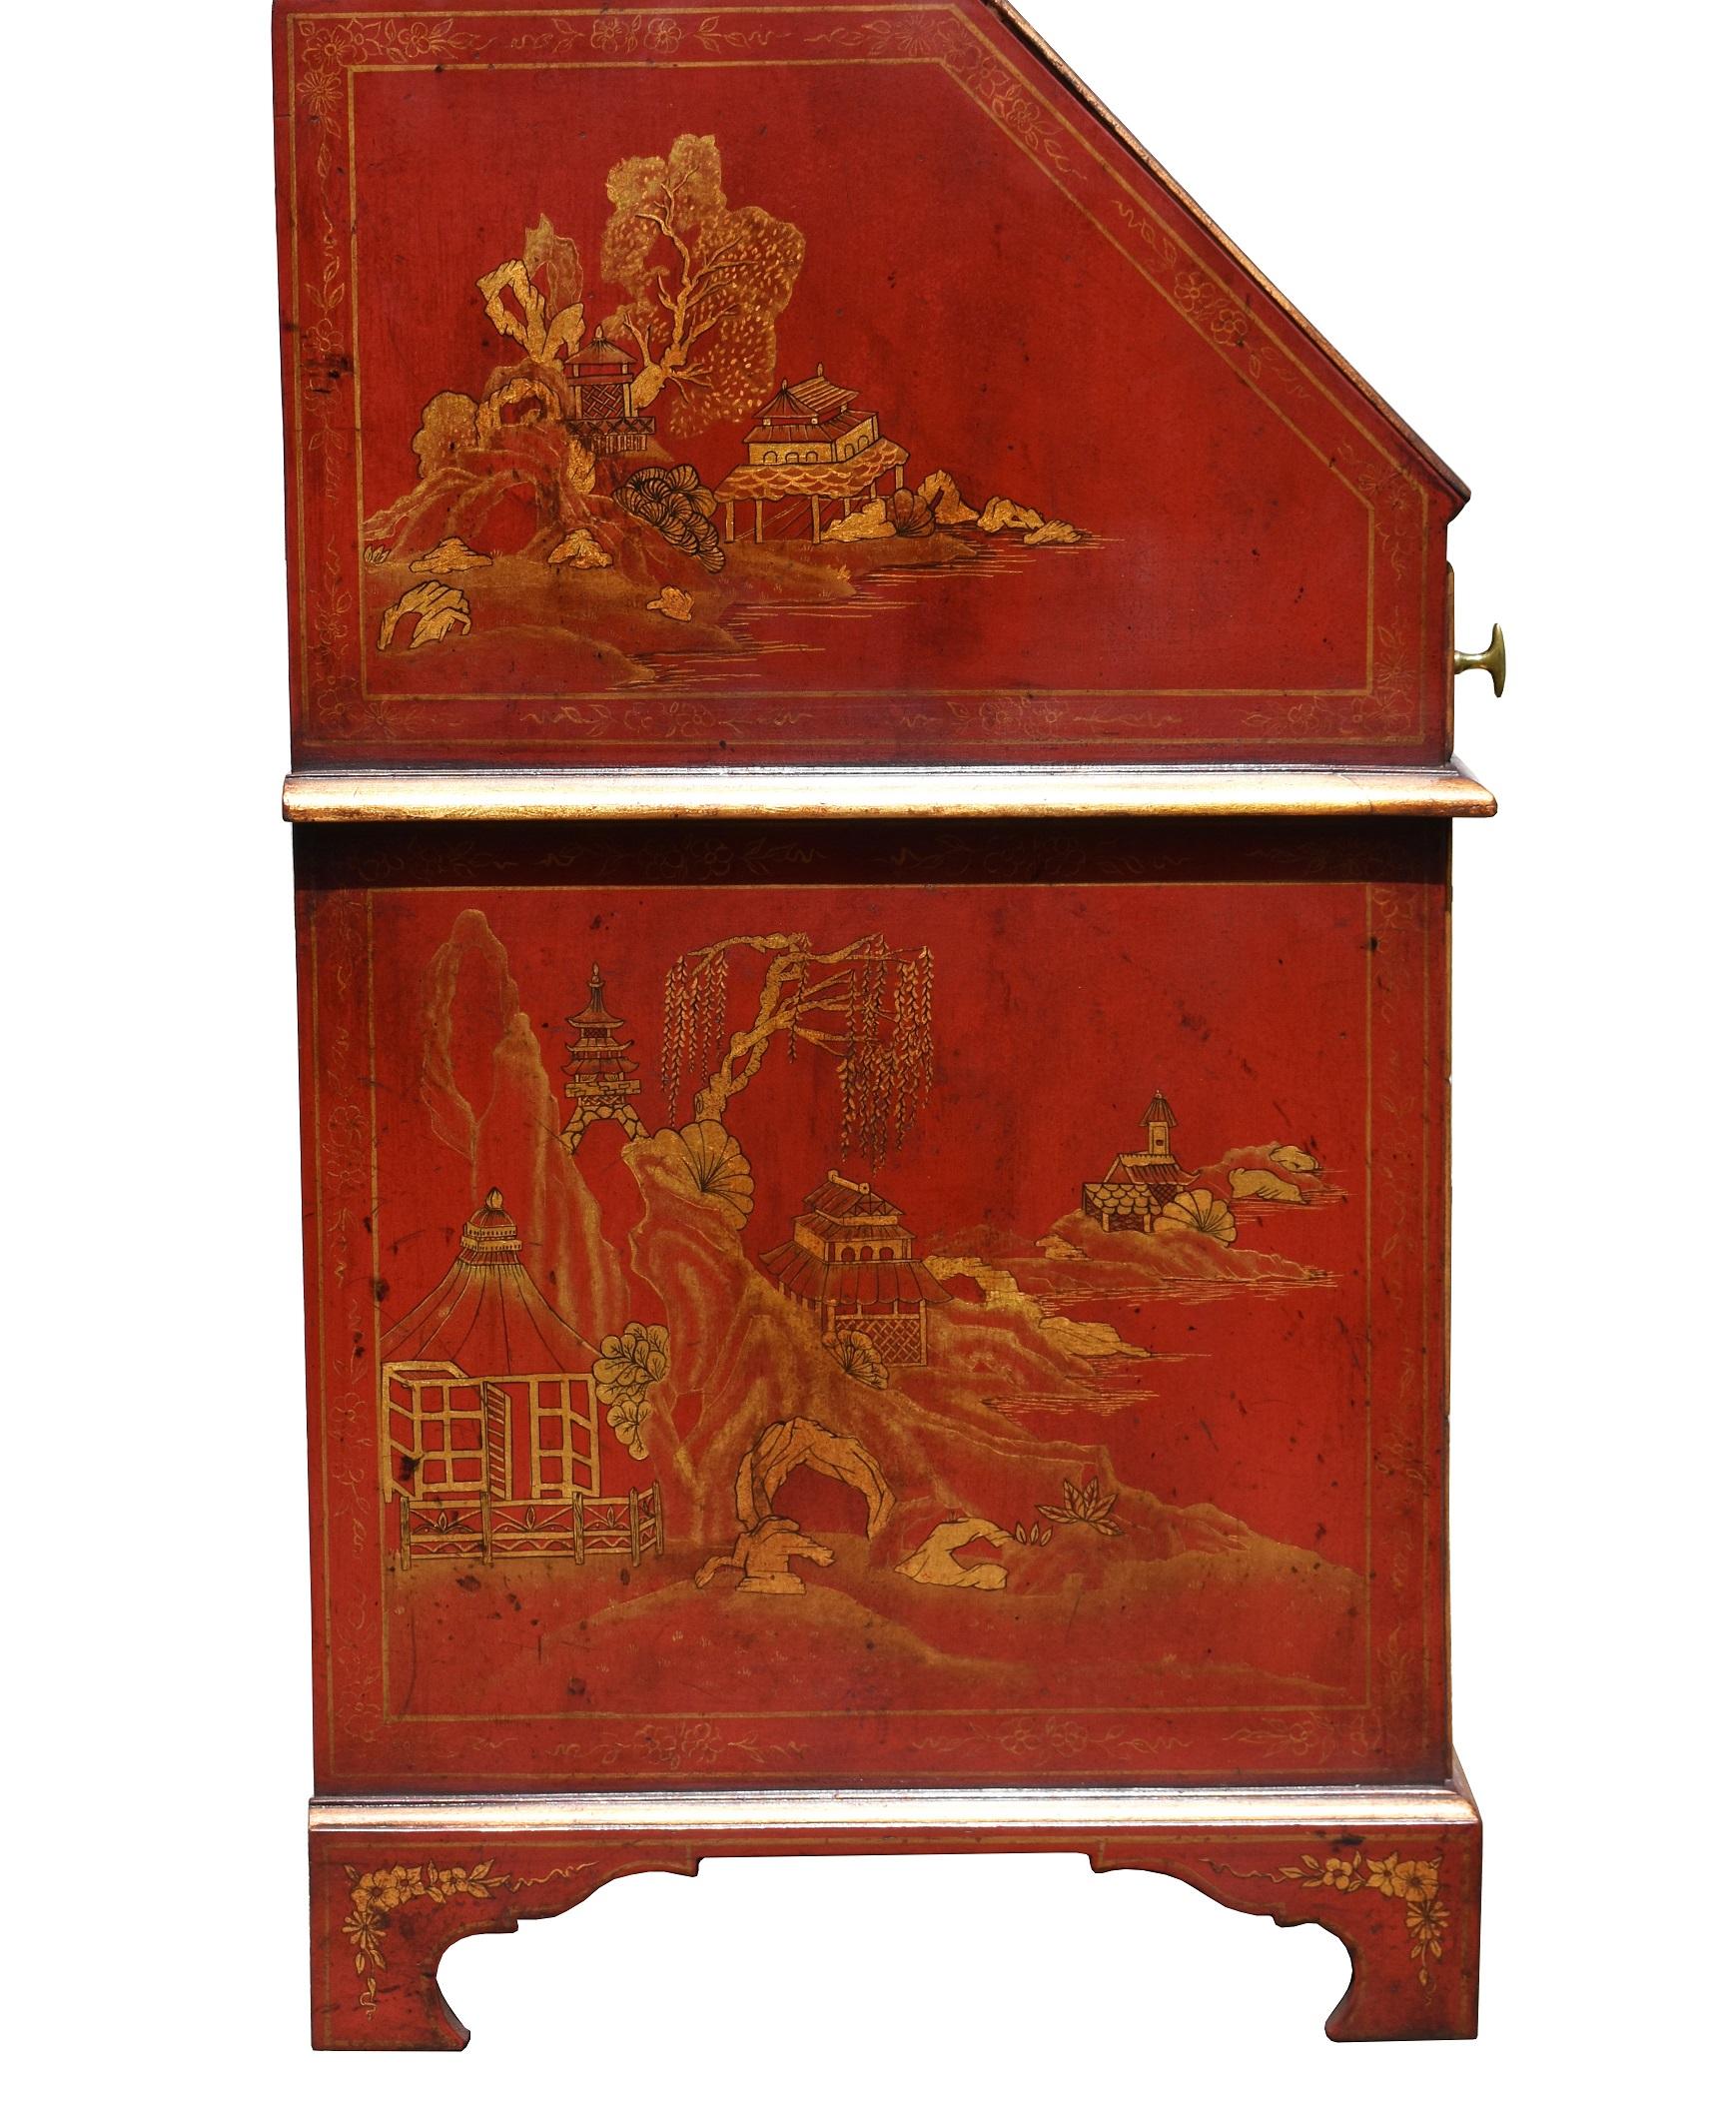 George III 18th Century Lacquer and Gilt Chinoiserie Bureau Bookcase For Sale